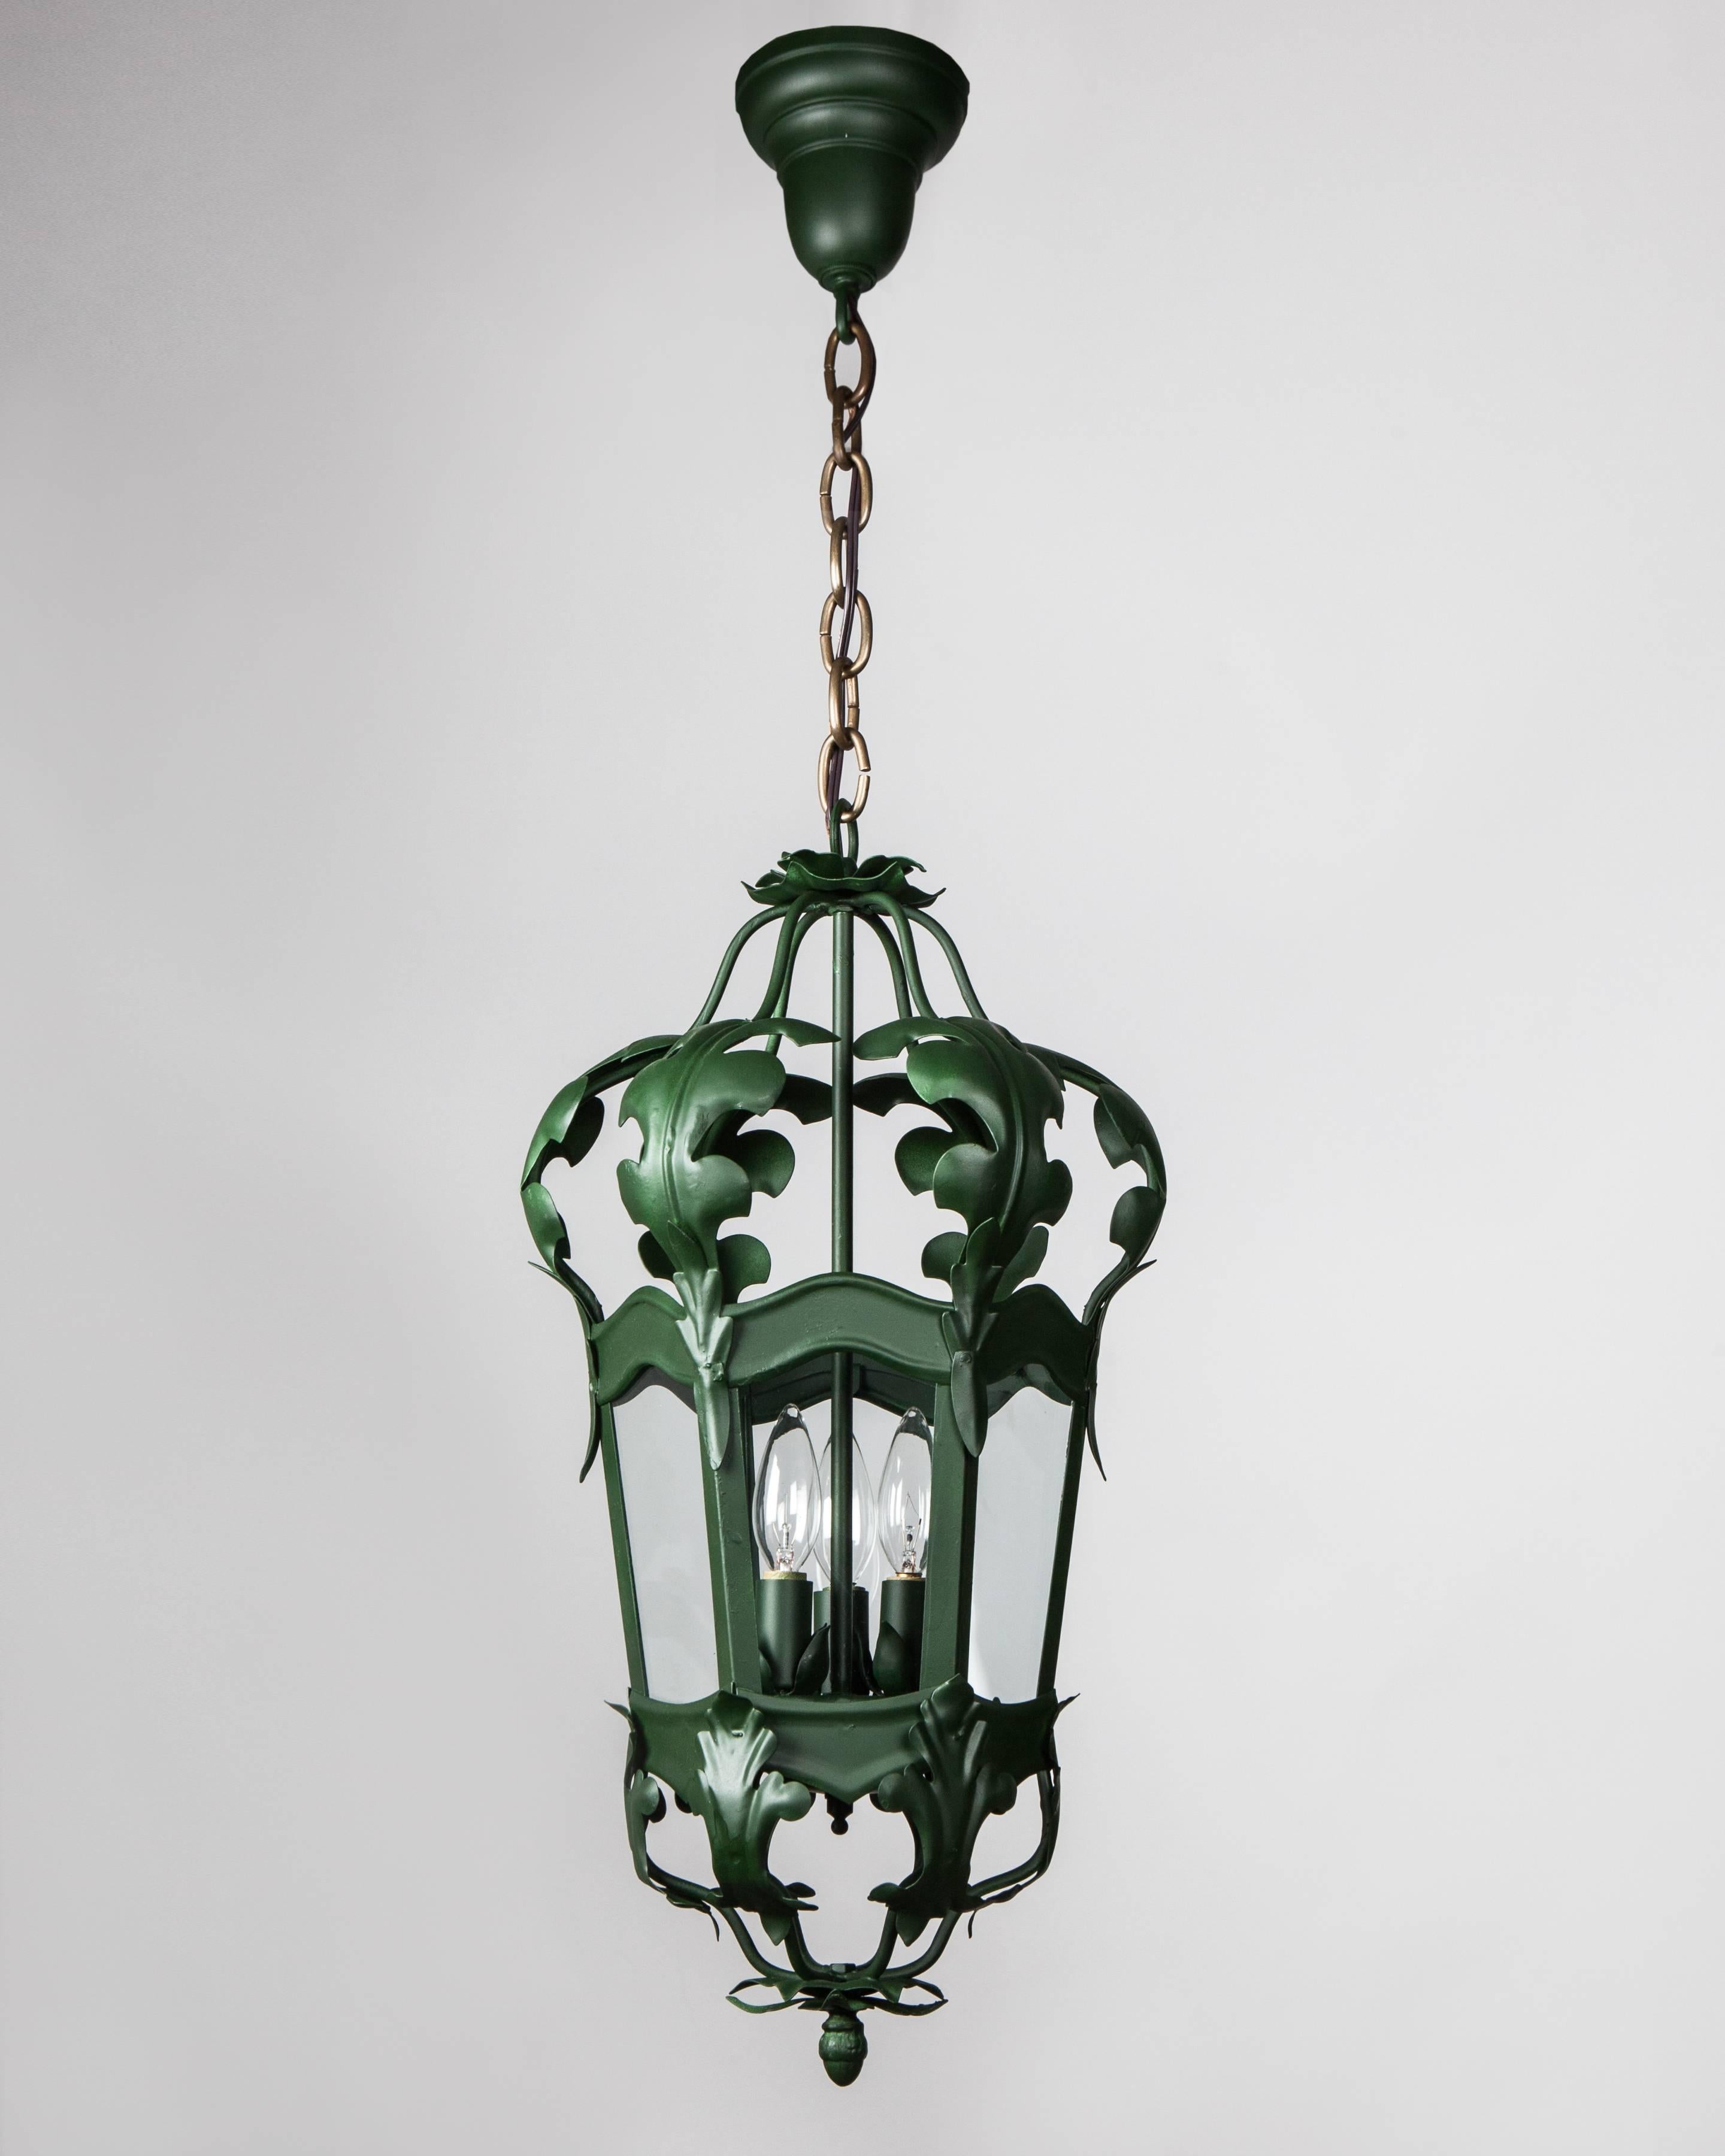 AHL4094
A vintage six-sided lantern with foliate details. In a green lacquered and aged brass finish. Glazed with clear glass panels. Due to the antique nature of this fixture, there may be some nicks or imperfections in the